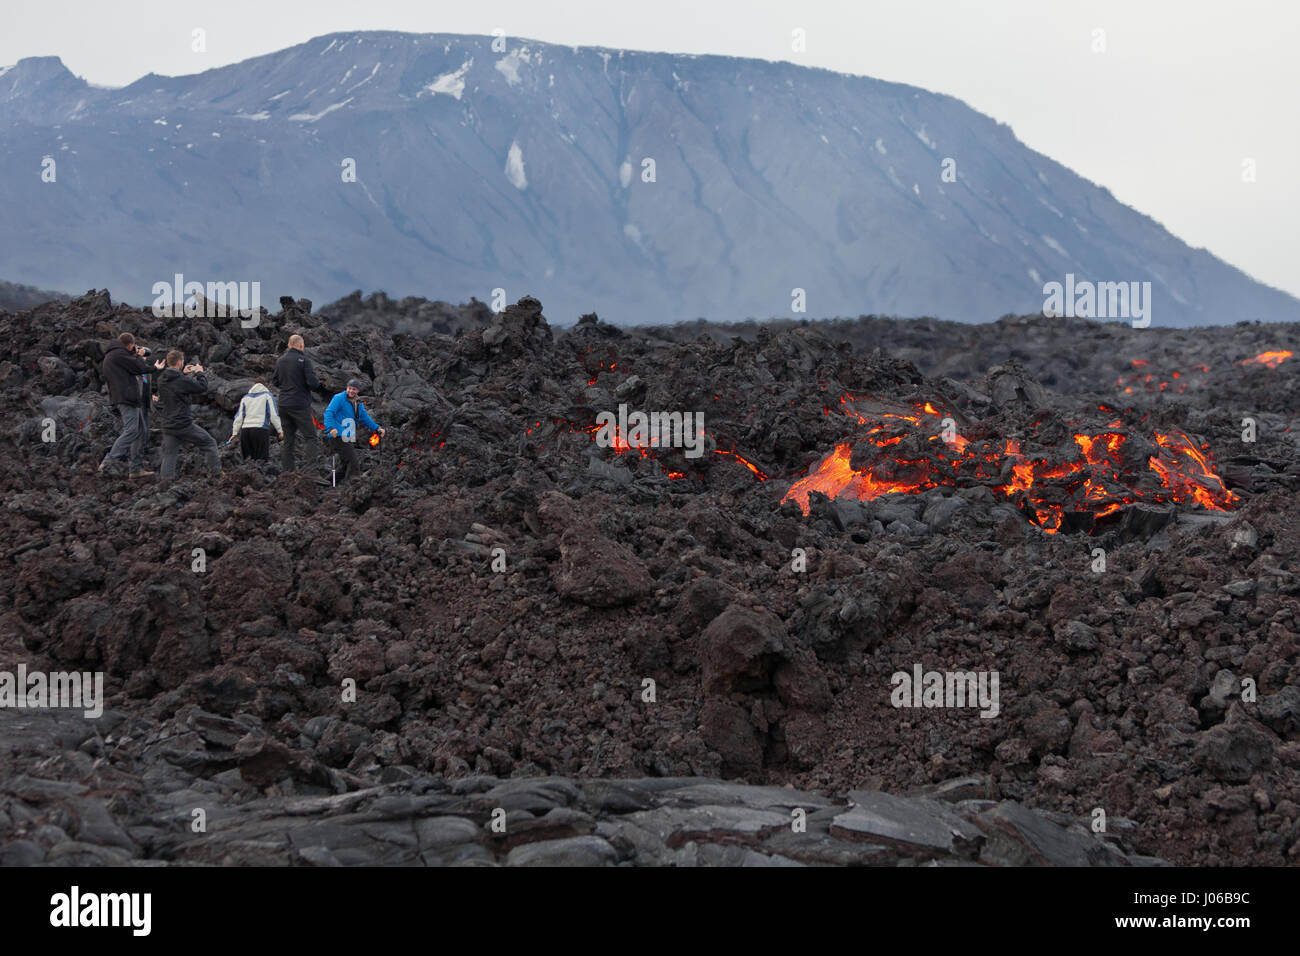 KAMCHATKA PENINSULA, RUSSIA: LOOKING like they are standing on hot coals these shots show fearless lava-lovers only ten feet away from the mouth of an active volcano. Perilously close to the action these adventurers, can be seen posing near glowing molten lava which can reach temperatures of 1,200 degrees Celsius. Russian photographer Sergey Krasnoshchekov (49) was able to snap this natural phenomenon unfolding at Tolbachik volcano in the Kamchatka peninsula, Russia. Stock Photo